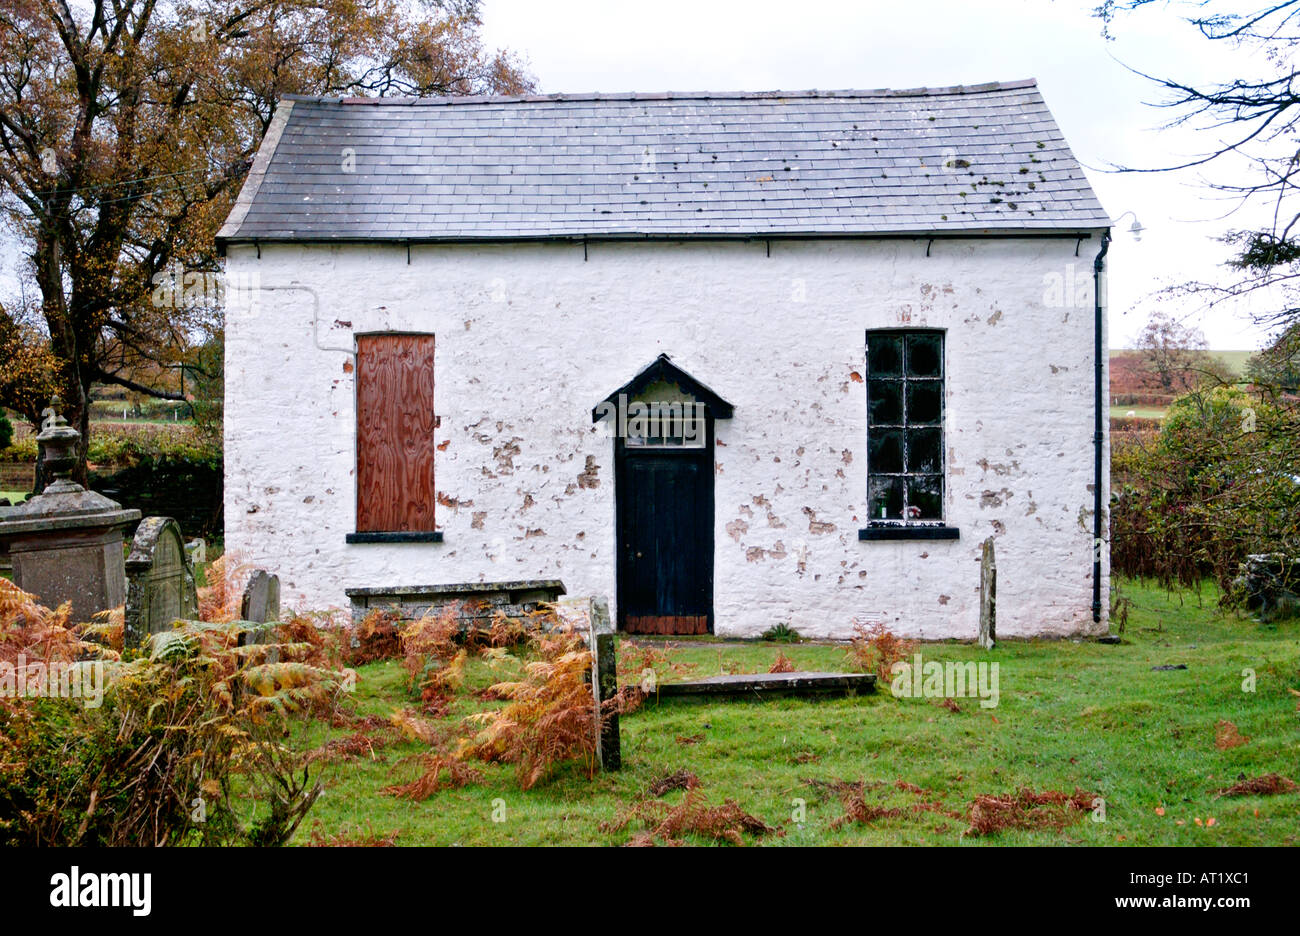 Welsh Bethesda Chapel at Brechfa near Brecon Powys Wales UK dated 1802 for sale for conversion to a two bedroom family home Stock Photo